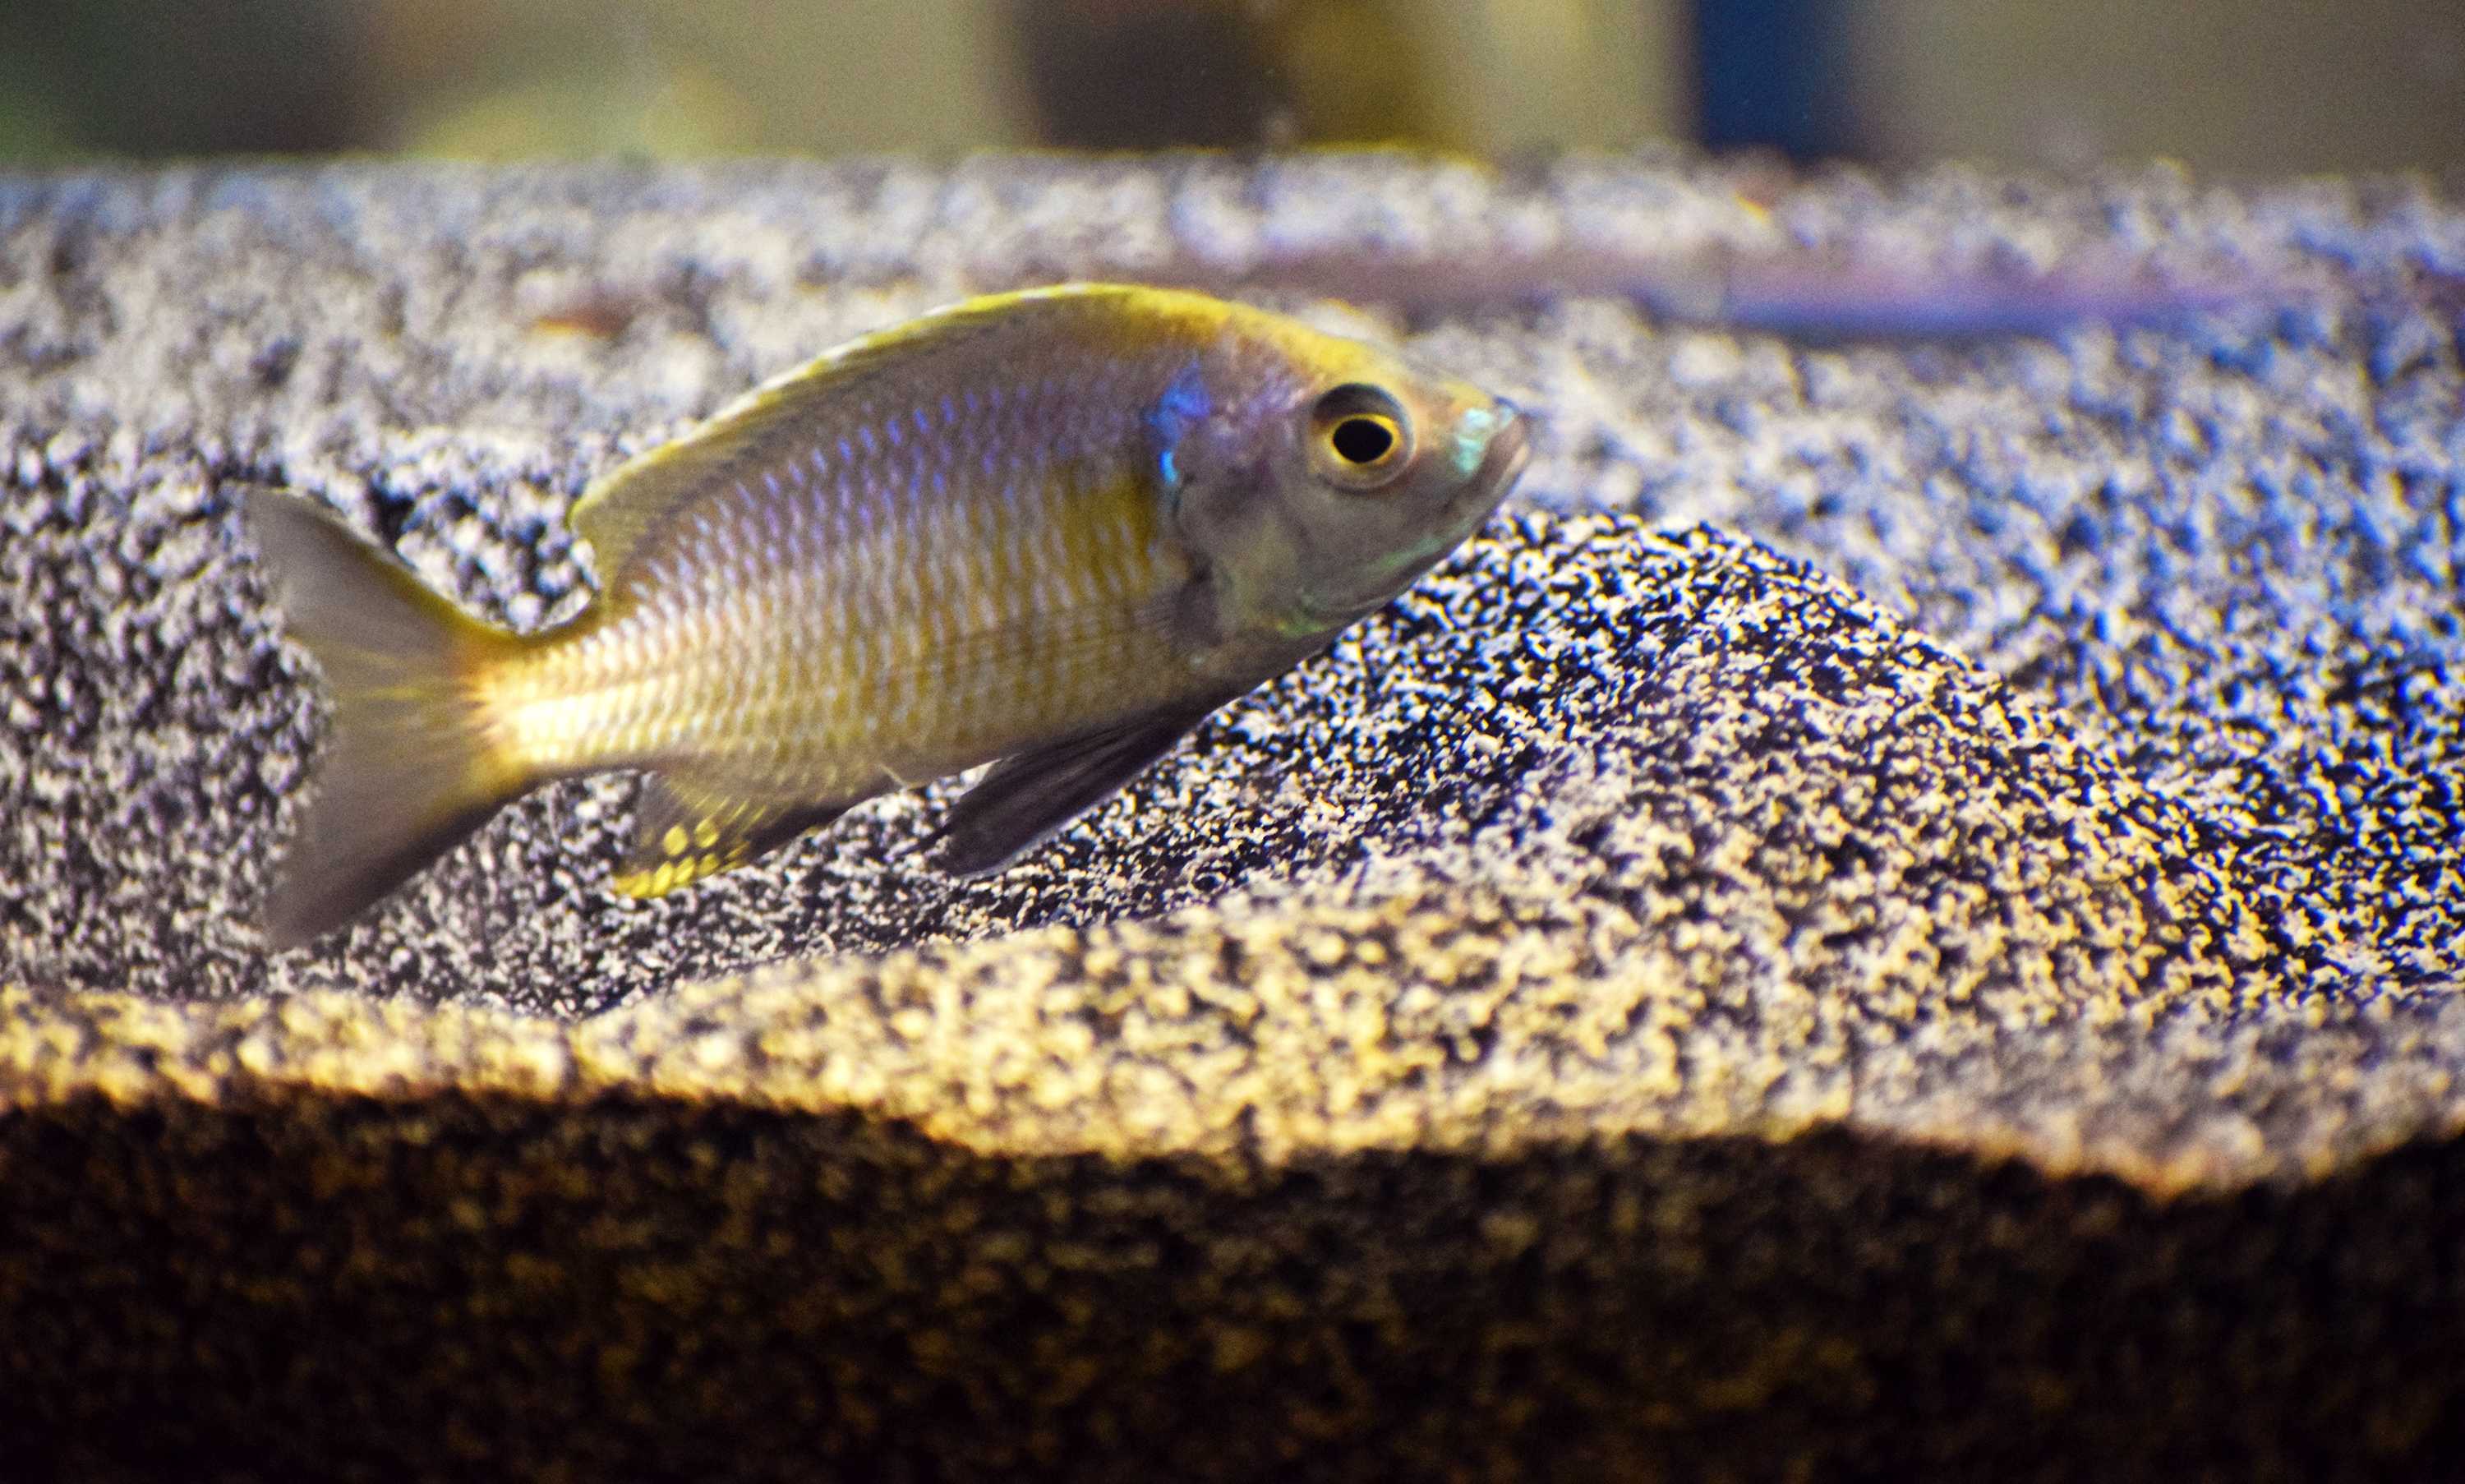 A special breed of cichlid fish has allowed researchers to match up gene activation with behavior. The up and down-regulation of genes may actually be steering ritual mating behaviors. The research is potentially useful in understanding autism since some genes involved in the fish behavior have human genetic cousins implicated in autism spectrum disorder. Credit: Georgia Tech / Rob Felt